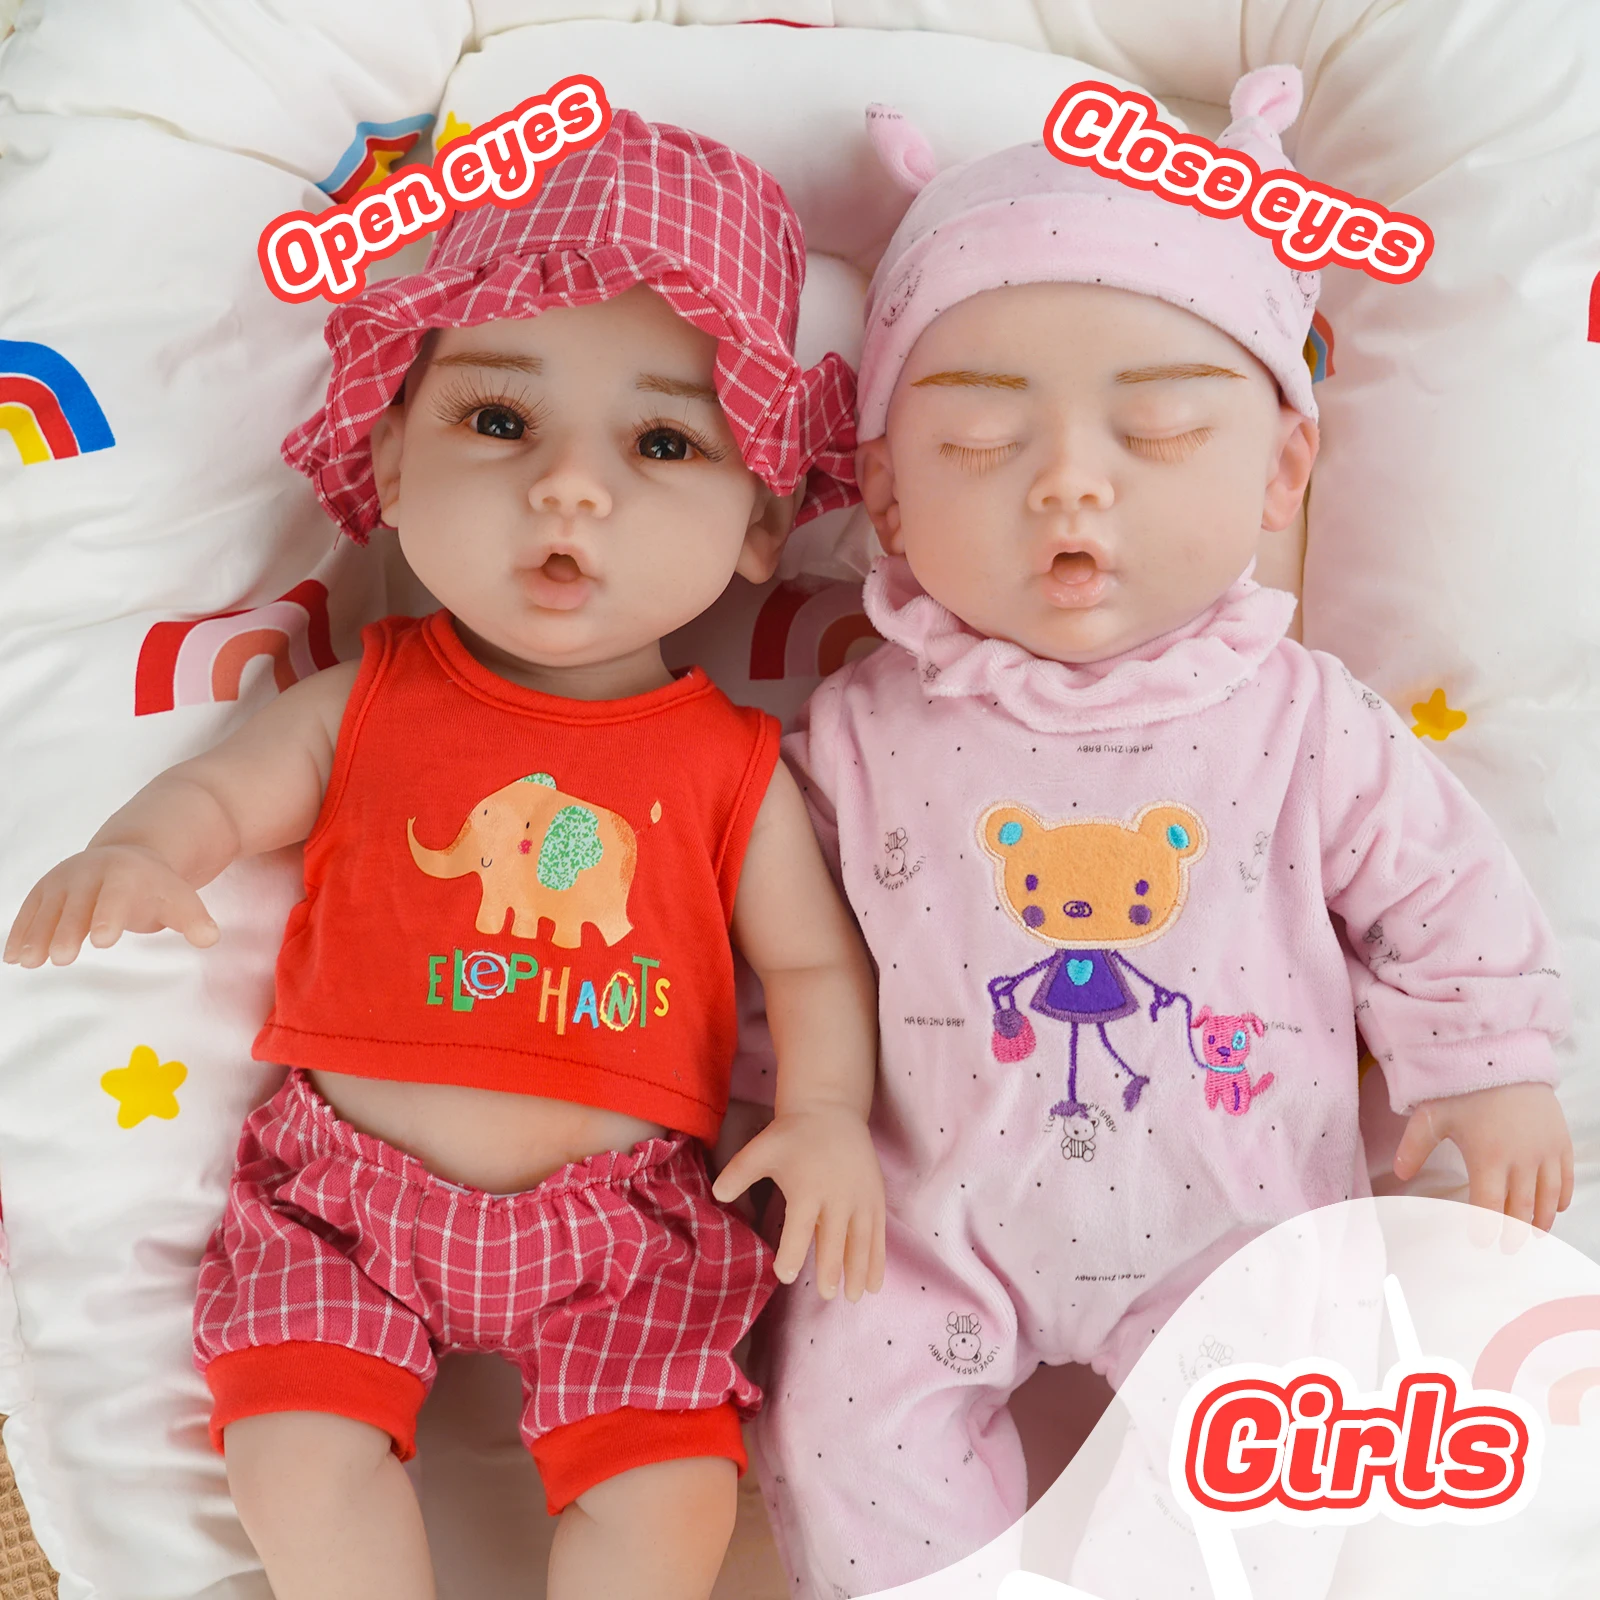 CUAIBB 47cm 2.8kg 100% Full Silicone Baby Doll Children Accompany Toys for Kids Birthday Gift Realistic Infant Care Model u charmmore 47cm 3kg full silicone reborn girl baby doll toys full body soft silicone realistic toys bebe for children doll gift